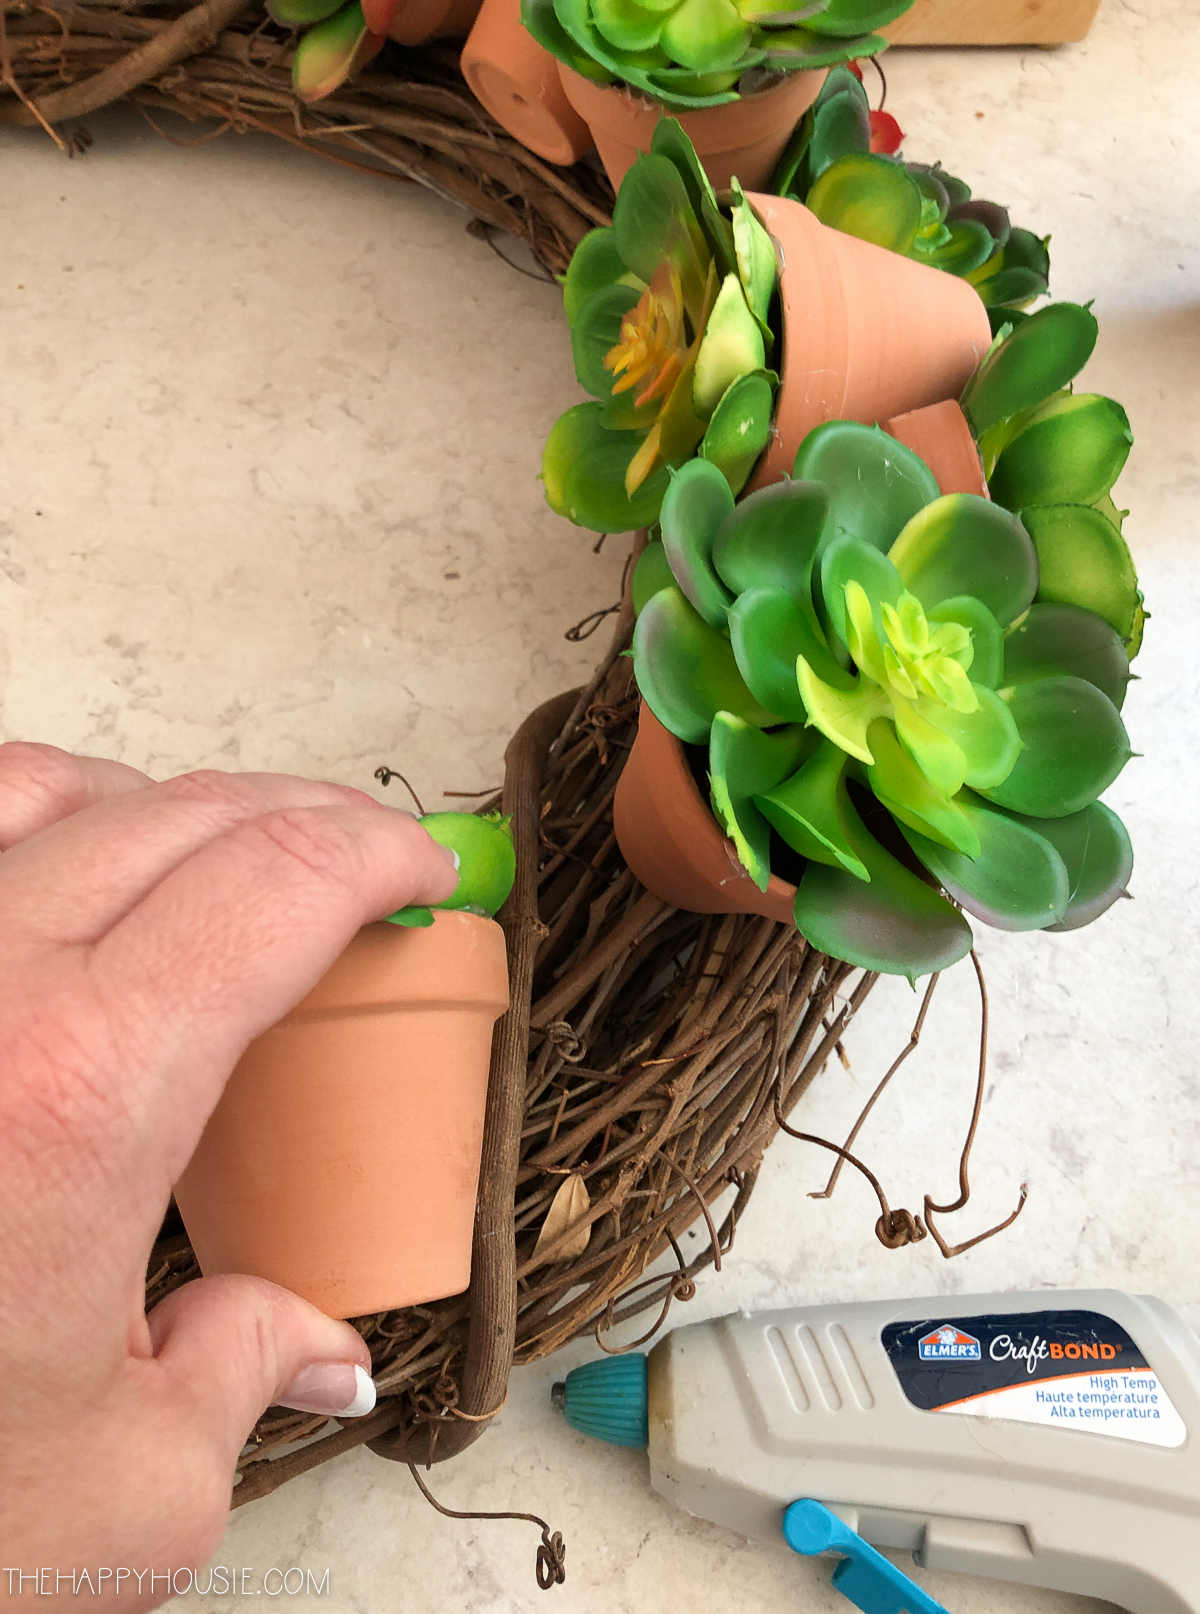 Attaching the succulent pots to the grapevine wreath.